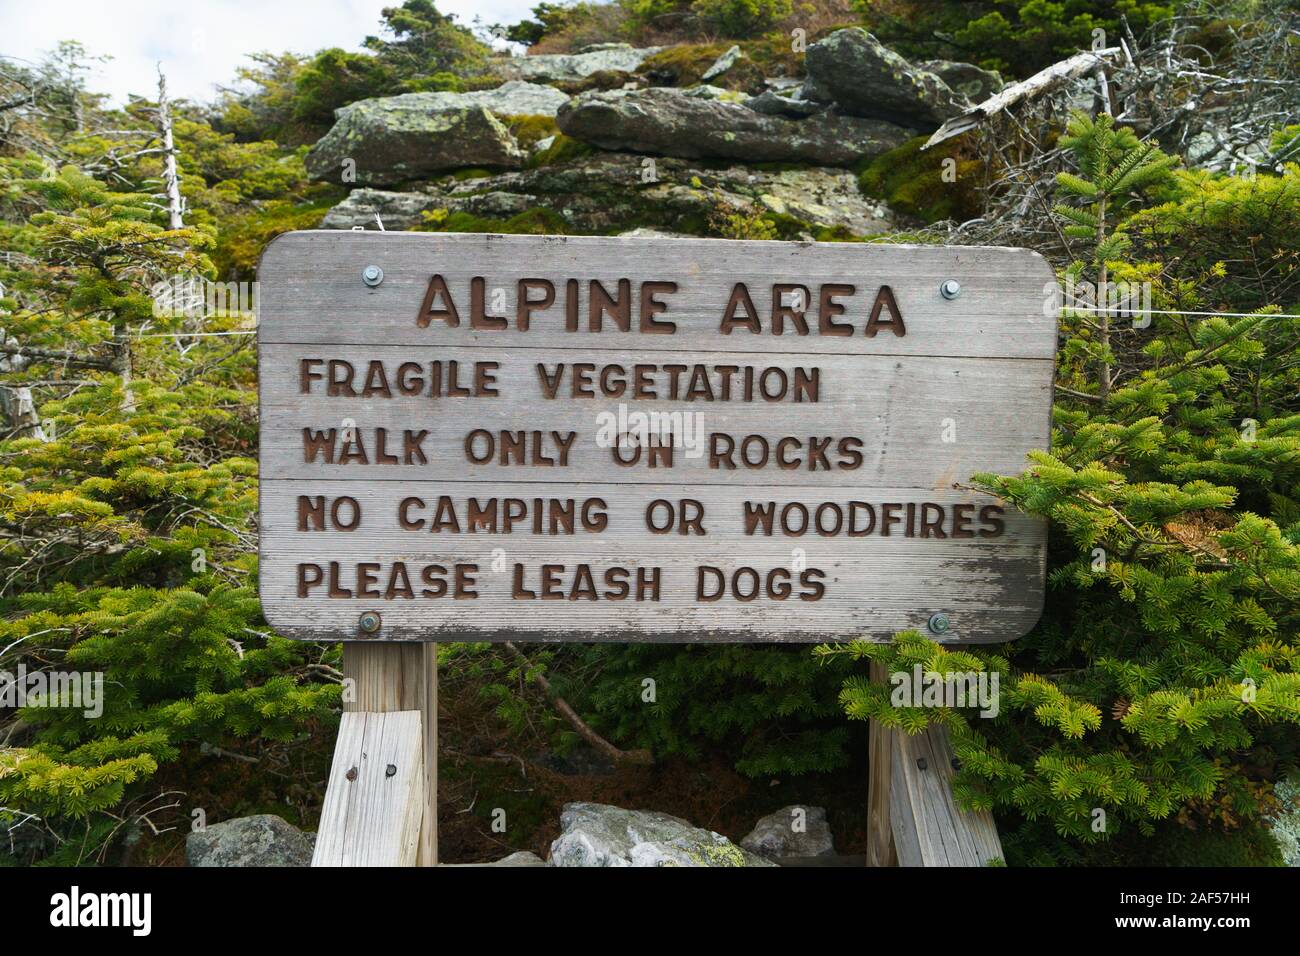 Sign warning hikers to stay on the trails to prevent damage to fragile vegetation, Camel's Hump, Vermont, USA. Stock Photo